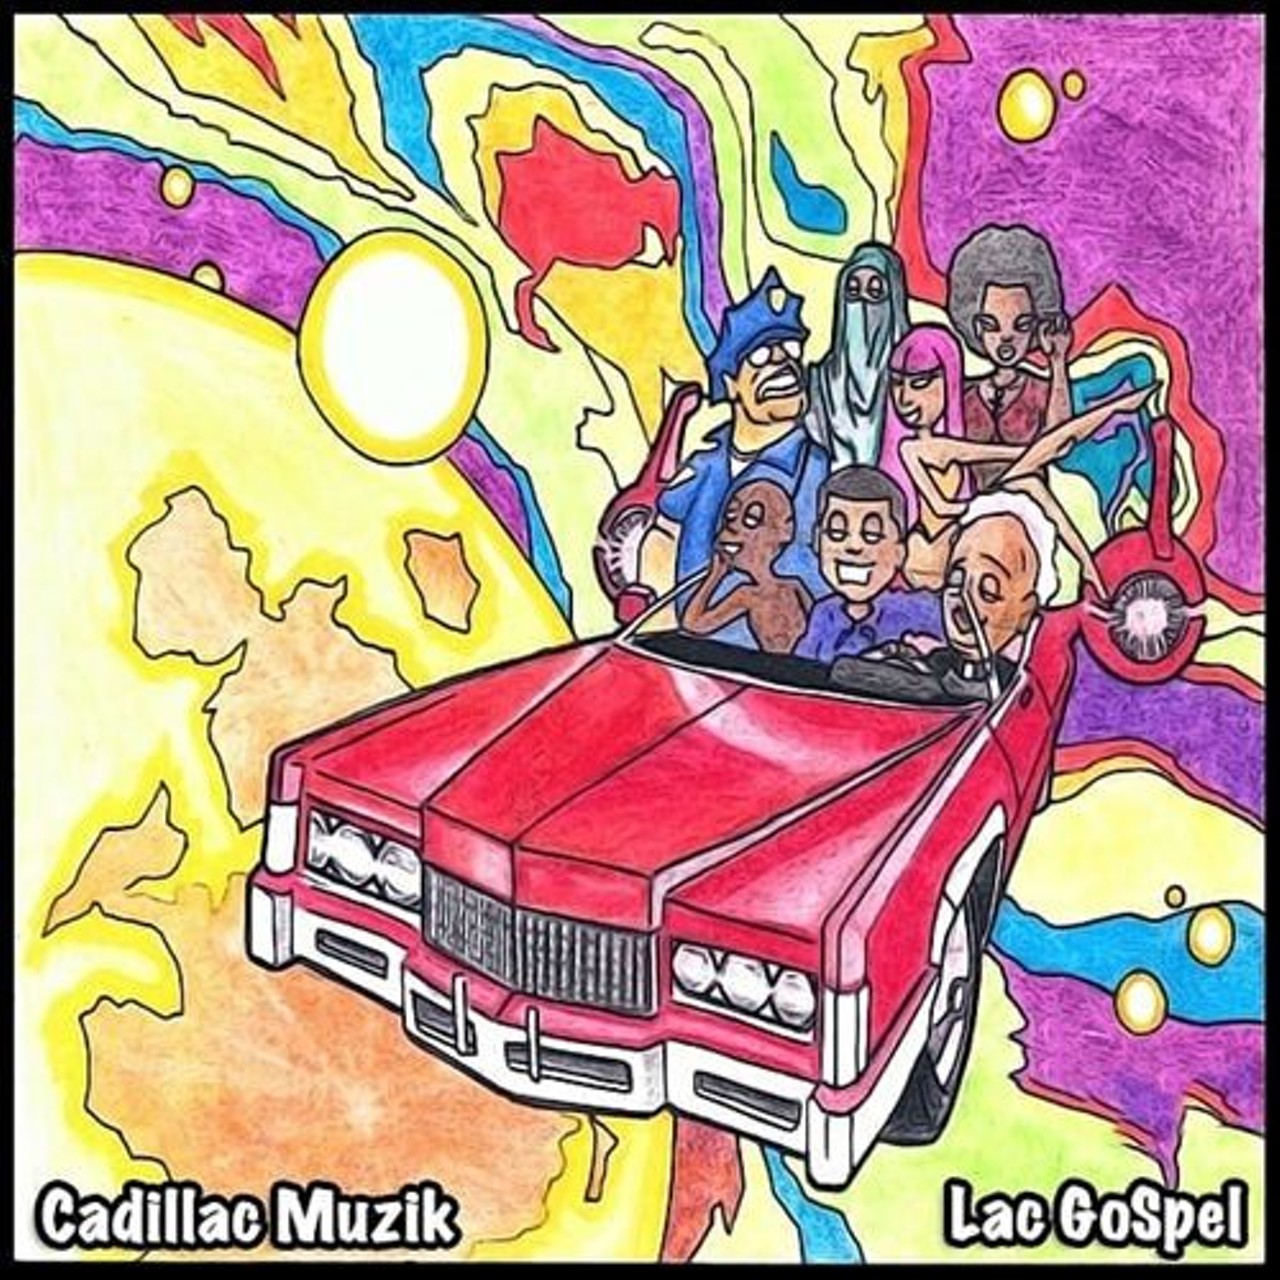 Cadillac Muzik: "Lac GoSpel"
San Antonio hip-hop duo Cadillac Muzik made their debut in 2018 with this fun, funky long player that owed an obvious debt to Southern rap groundbreakers OutKast but with plenty of musical touches all their own.
Photo via Bona Fide Mindz